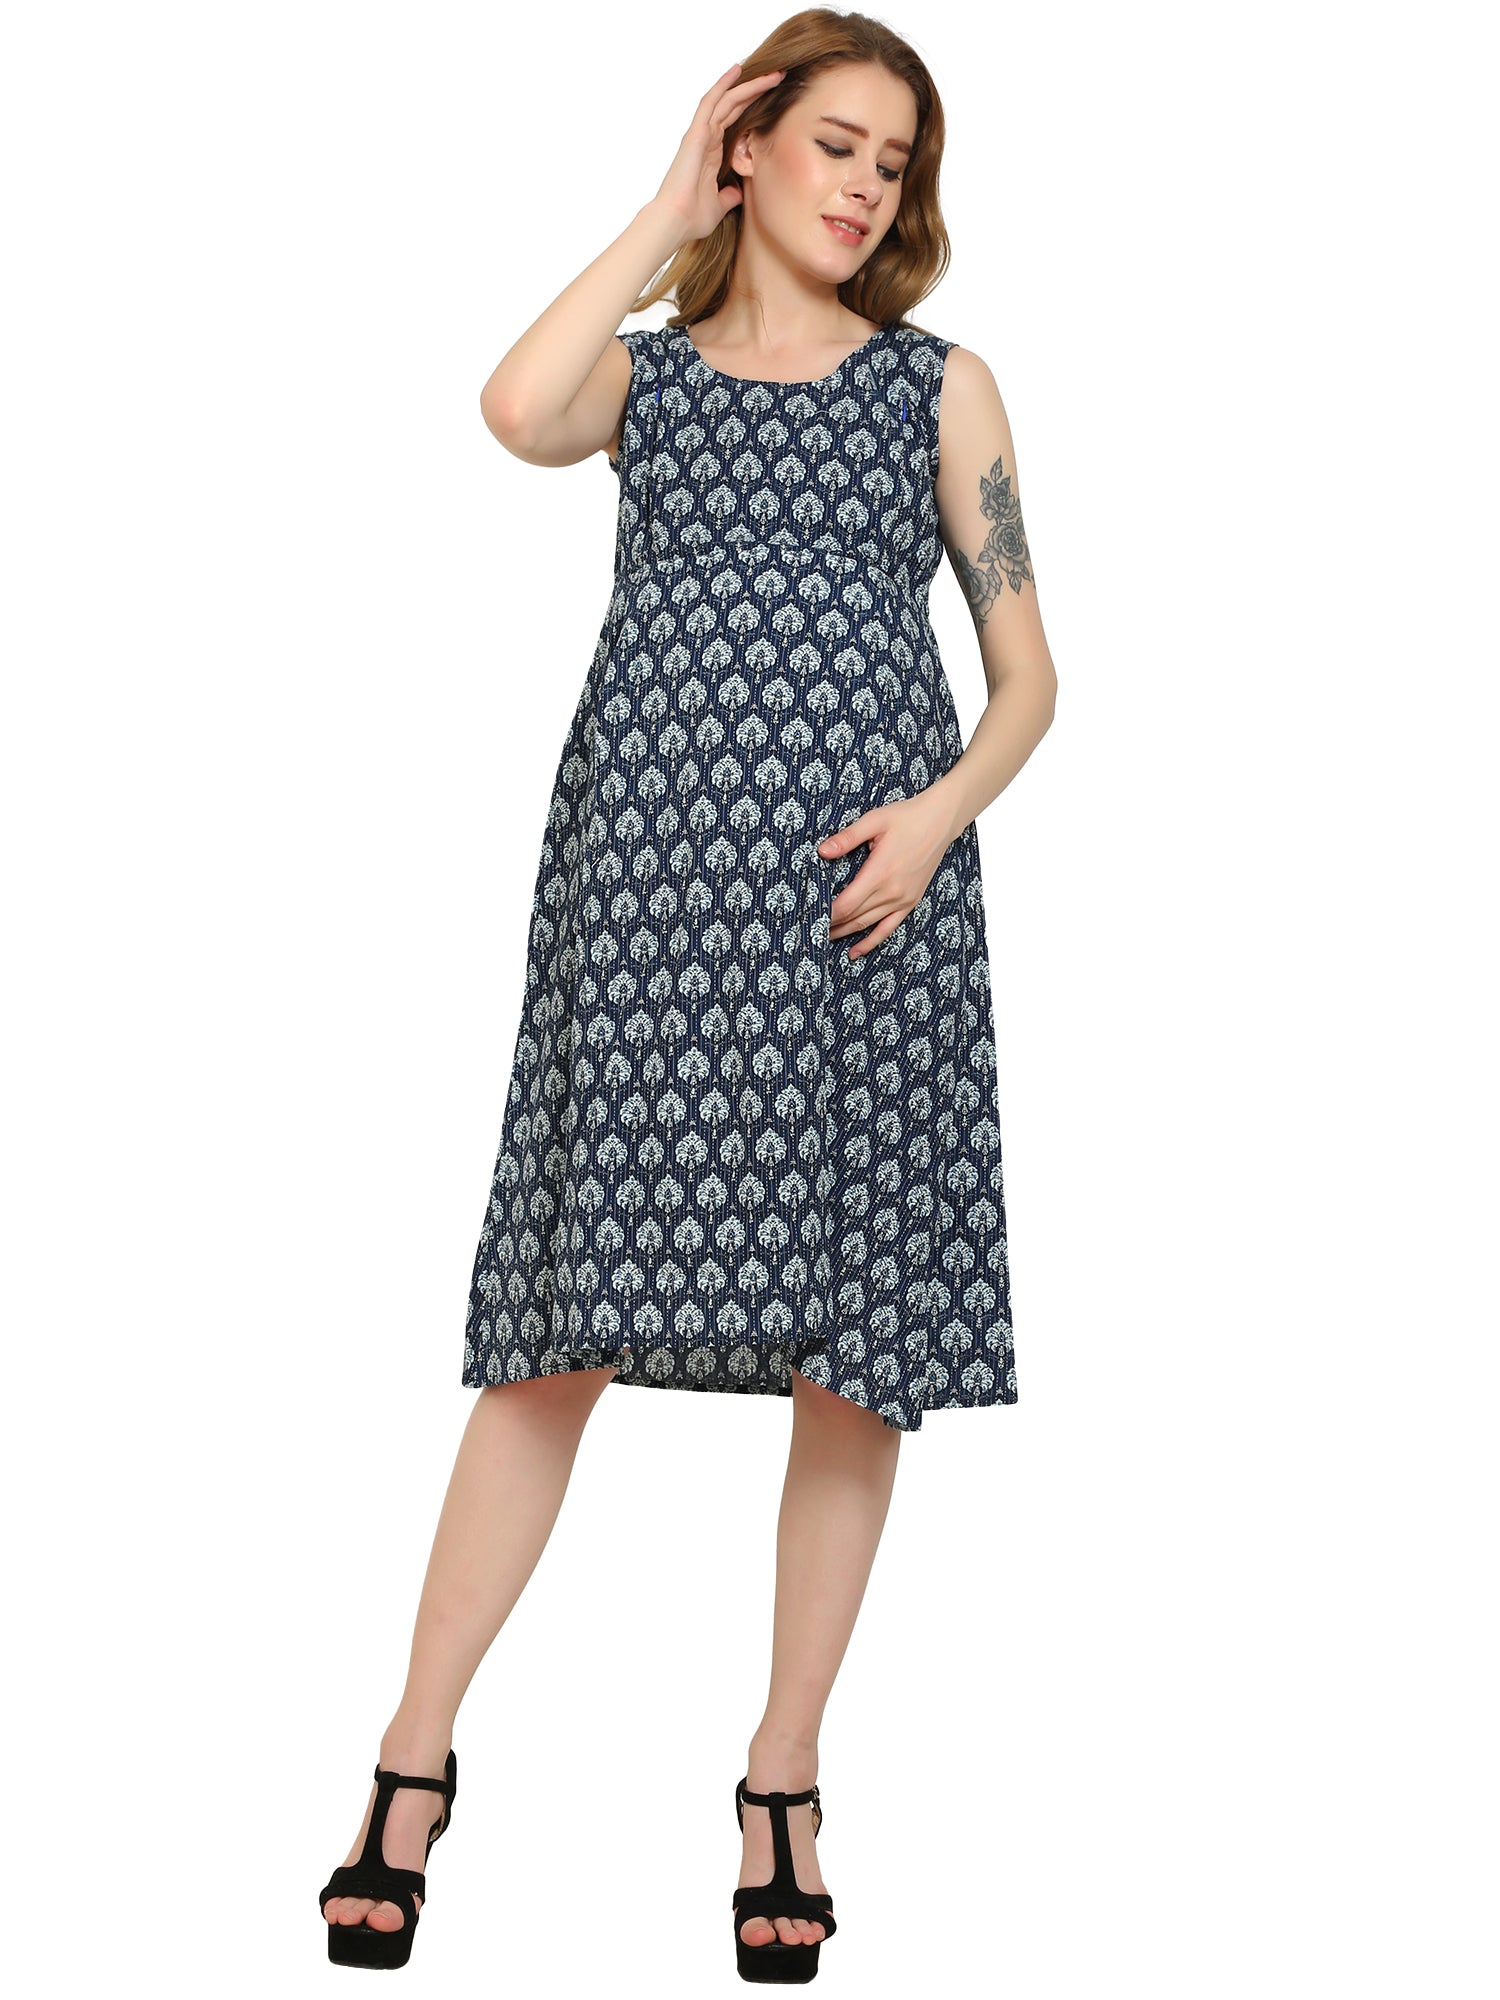 Indigo Fit and Flare Cotton Maternity and Feeding Dress